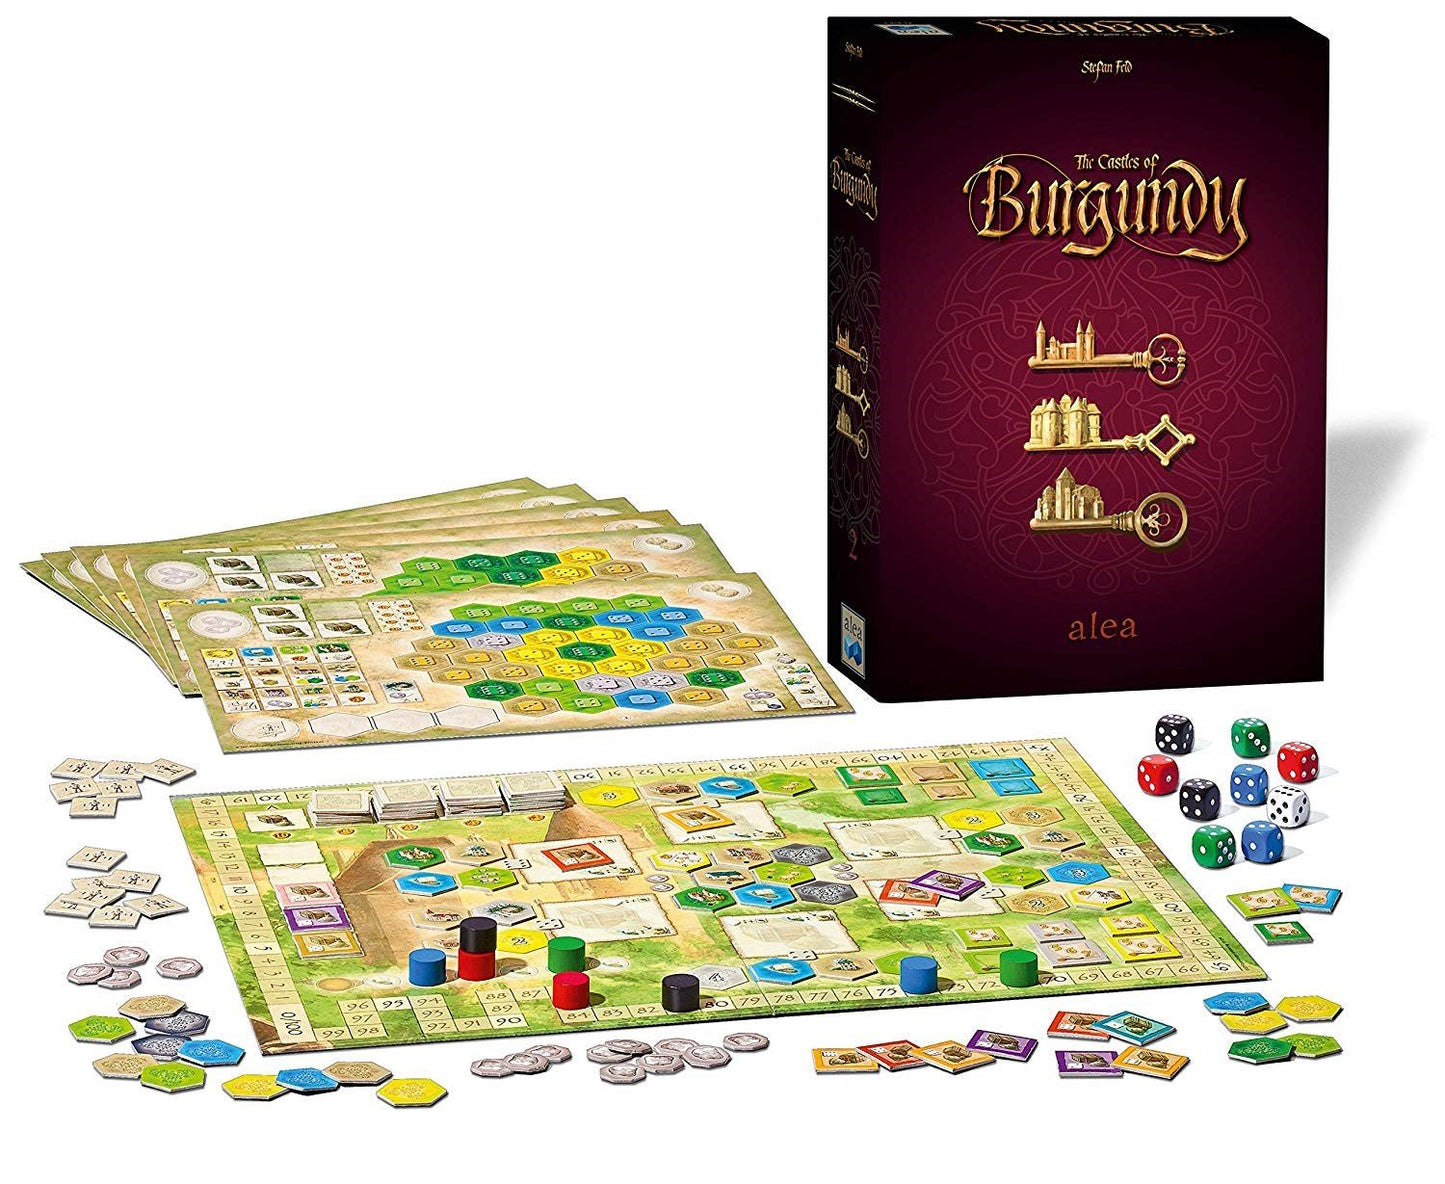 The Castles of Burgundy 20th Anniversary Edition (ALEA) - The Fourth Place